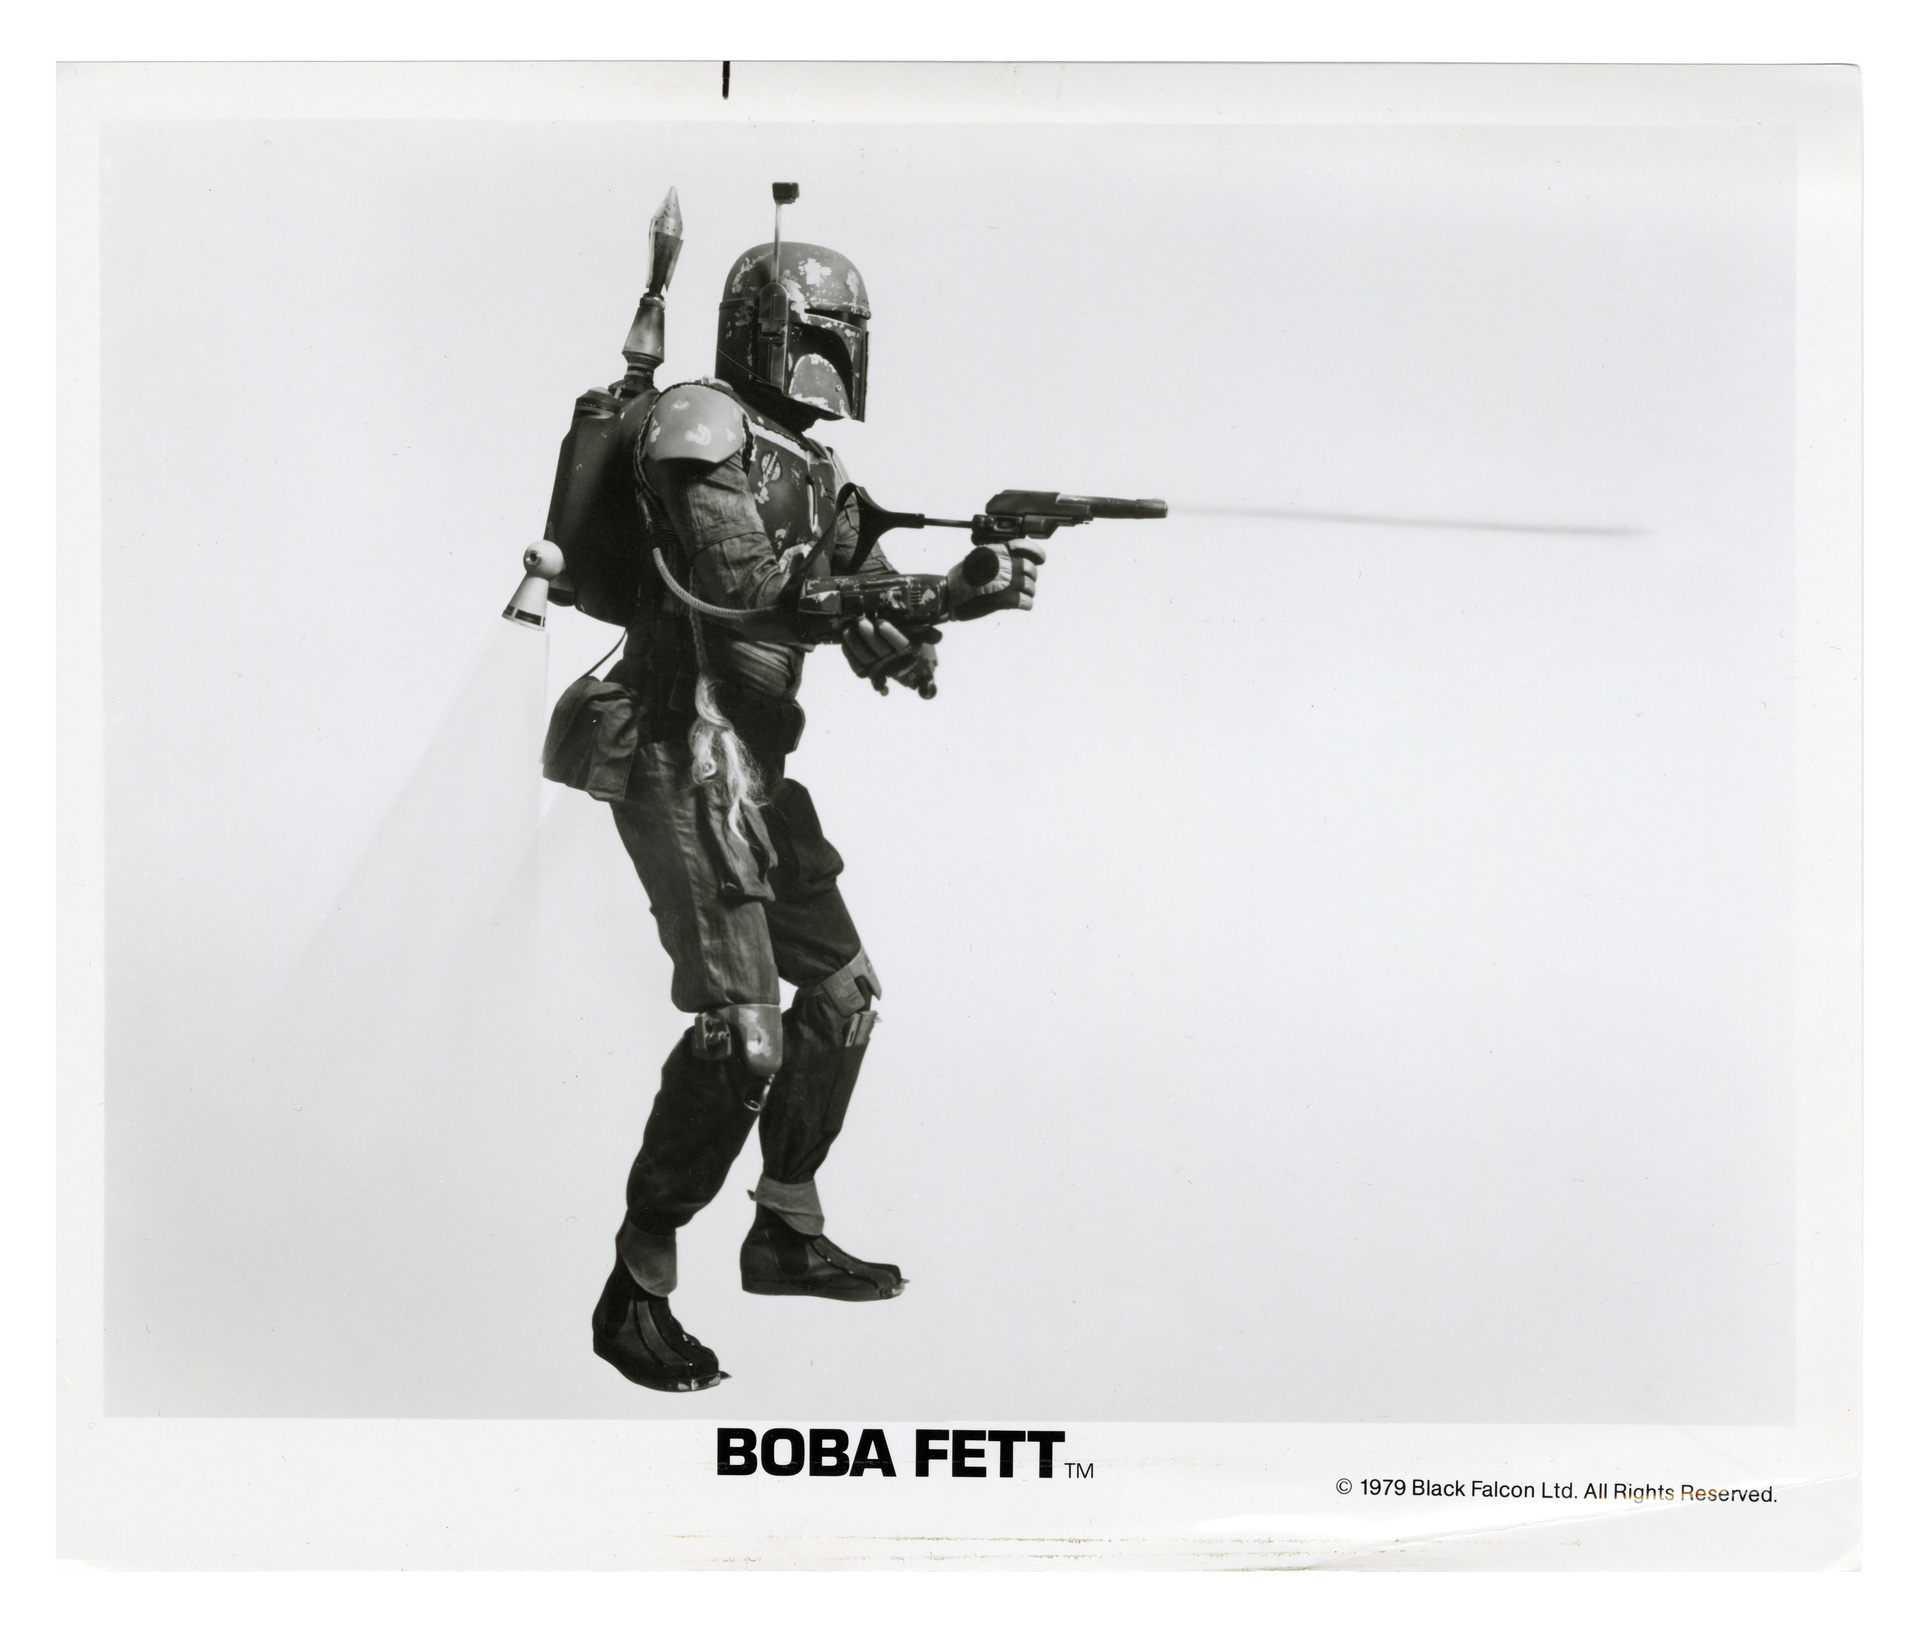 Lucasfilm Boba Fett Character Biography From 1979 Publicity Material Image Galleries Boba